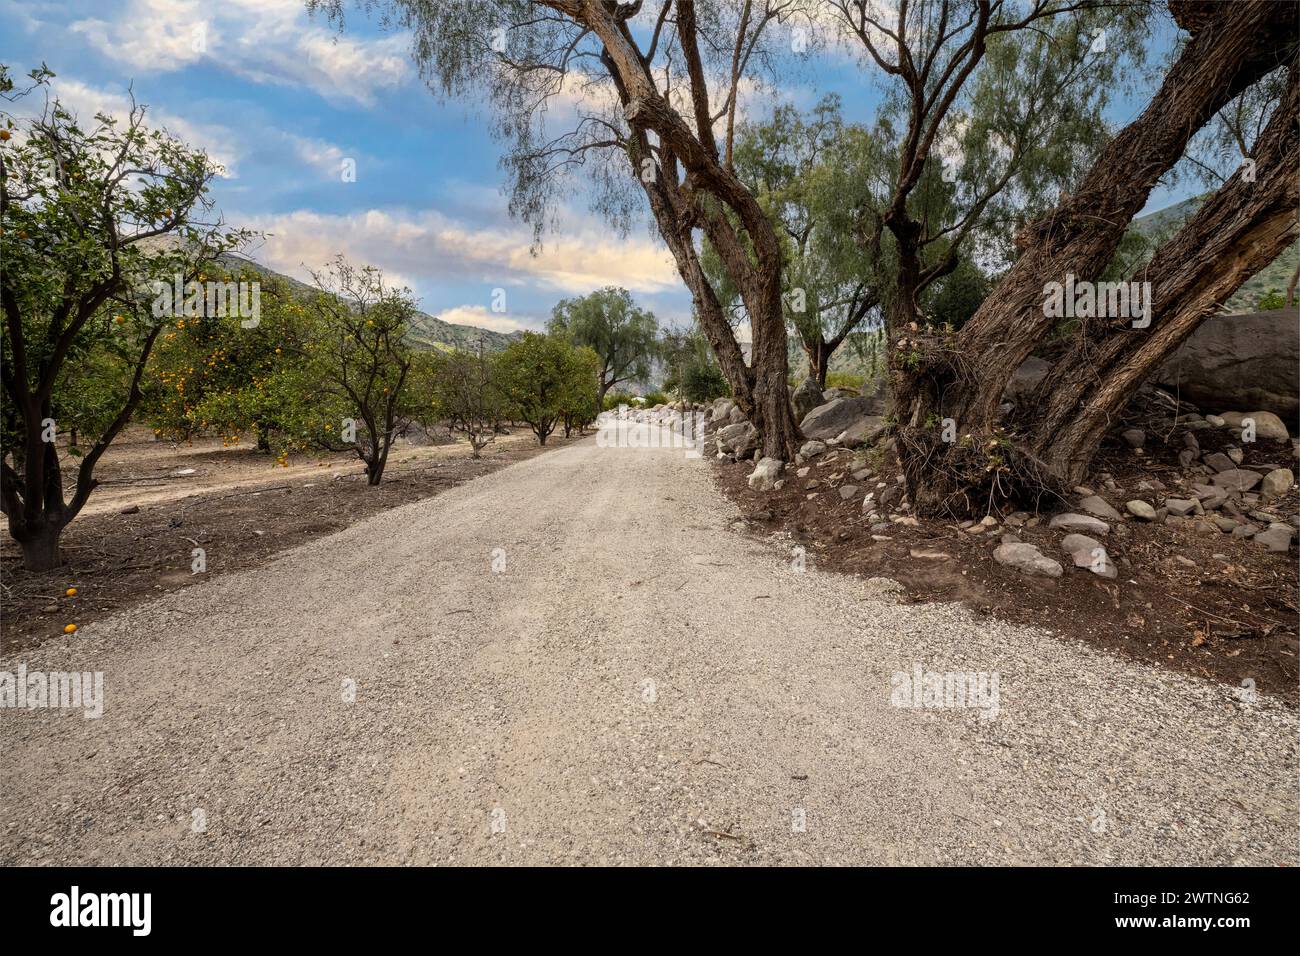 Farm road leads between orange orchard trees and a levy made of large river rock and willow trees. Stock Photo